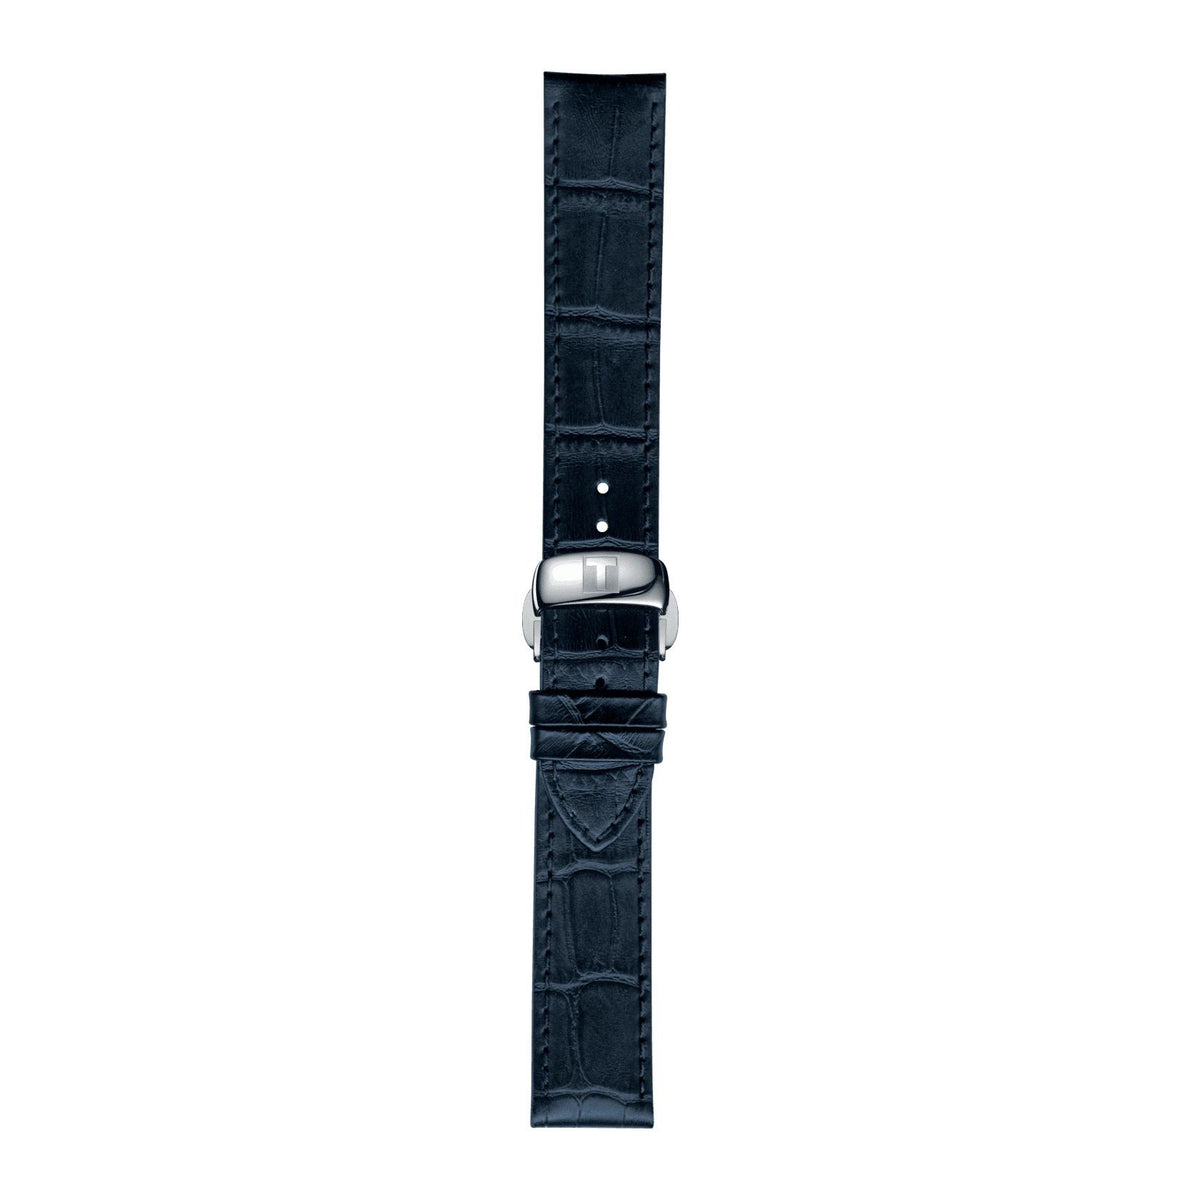 Official Tissot BLUE LEATHER strap ANSA 19 MM T852032781